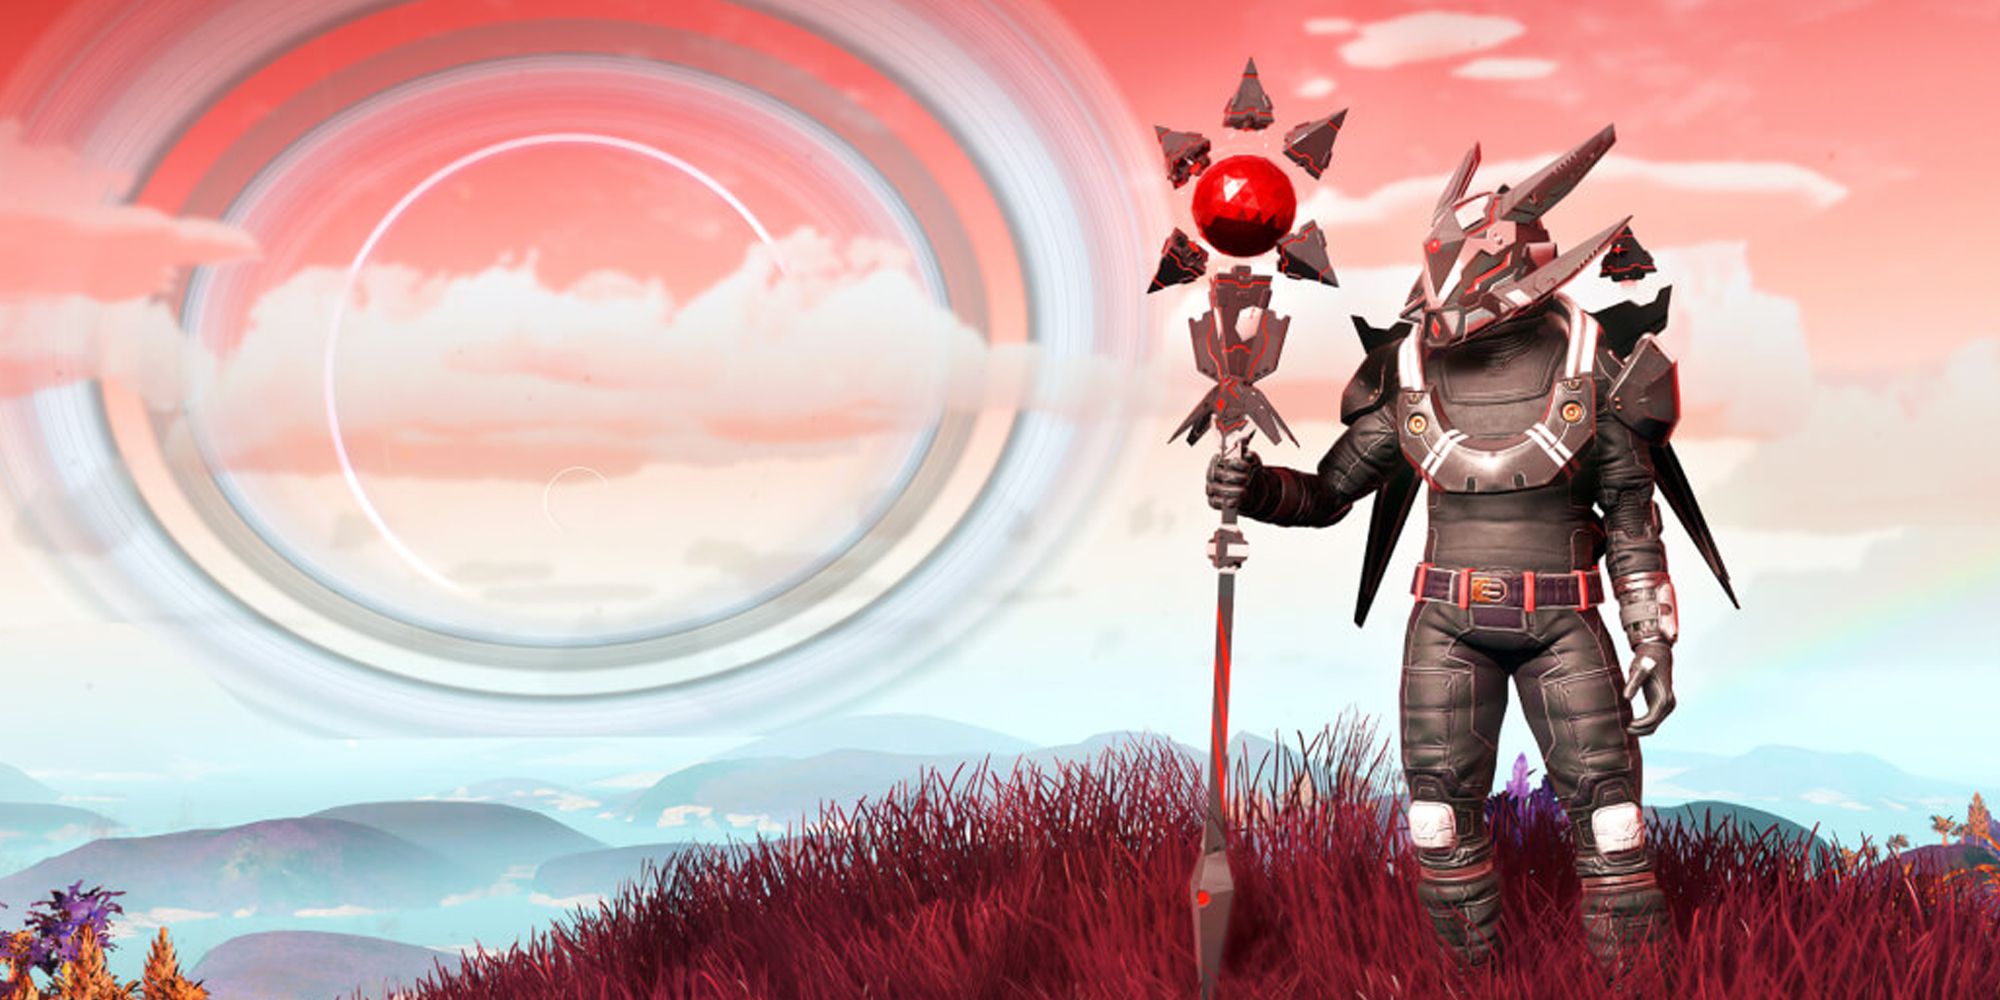 No Mans Sky Atlas Headshield and Staff key art, man standing on red grass with a planet in the background